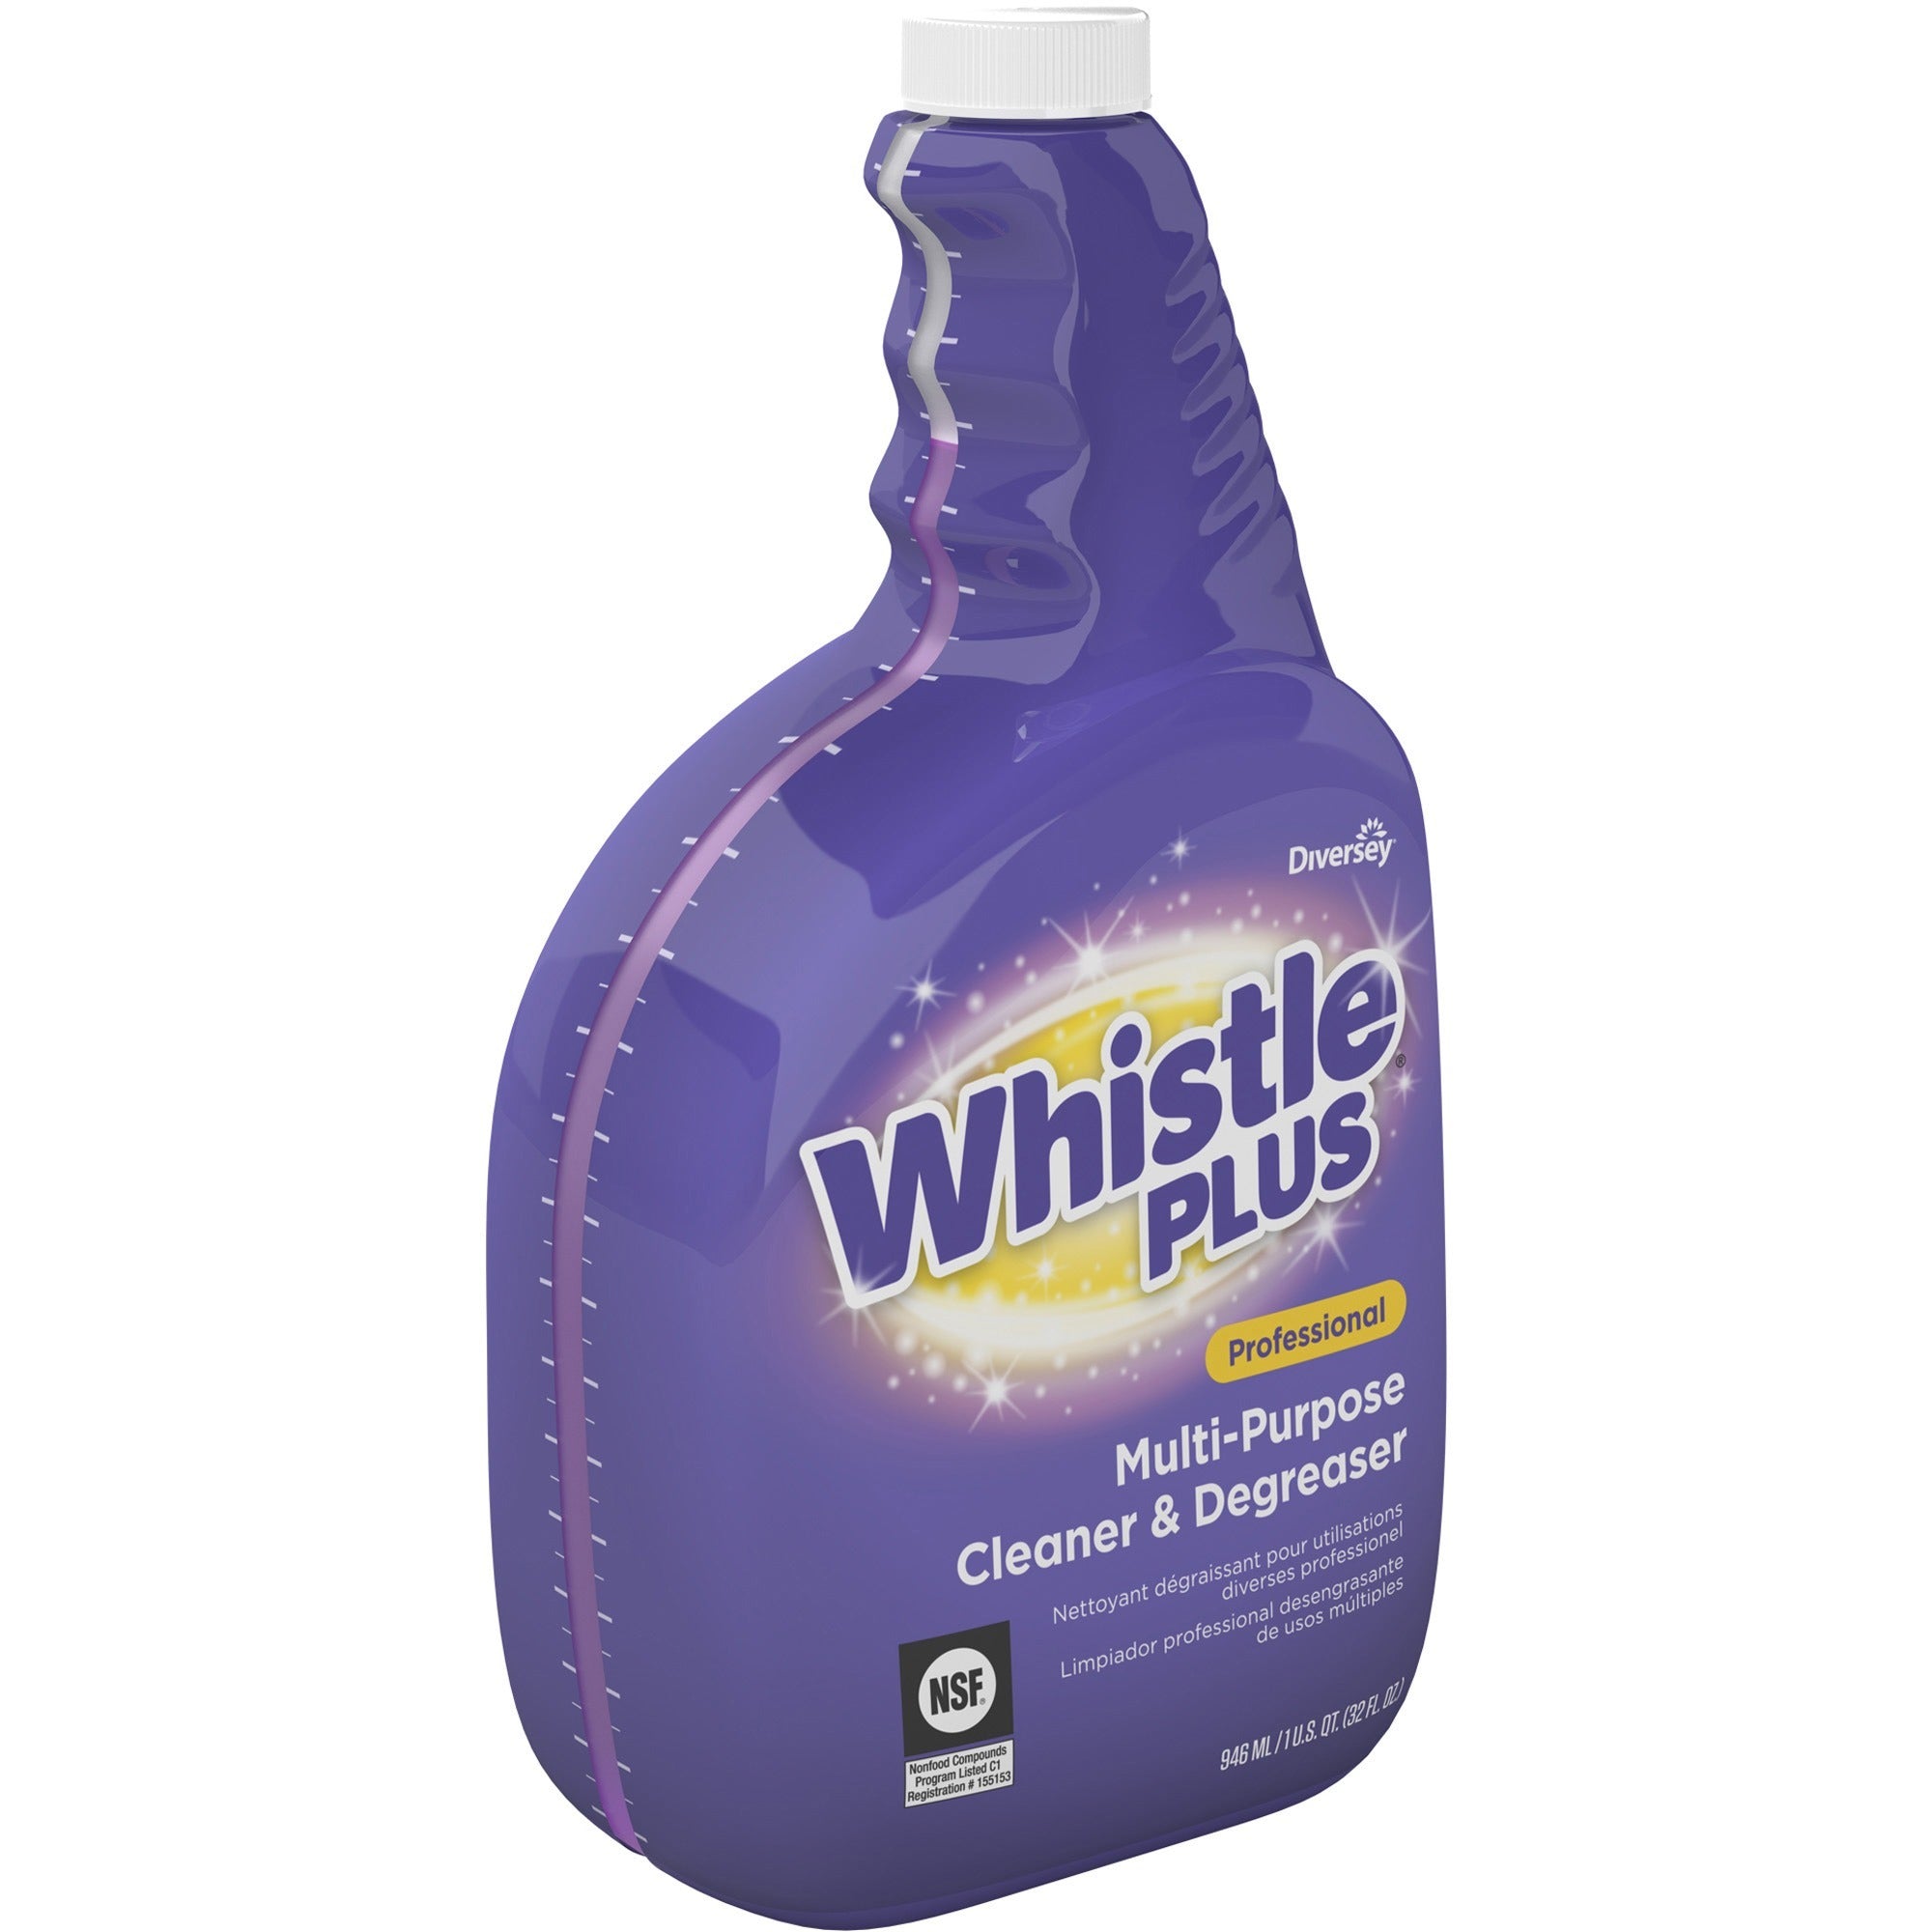 diversey-whistle-plus-cleaner-&-degreaser-ready-to-use-32-fl-oz-1-quart-citrus-scent-4-carton-heavy-duty-easy-to-use-rinse-free-non-streaking-phosphate-free-purple_dvocbd540571ct - 4